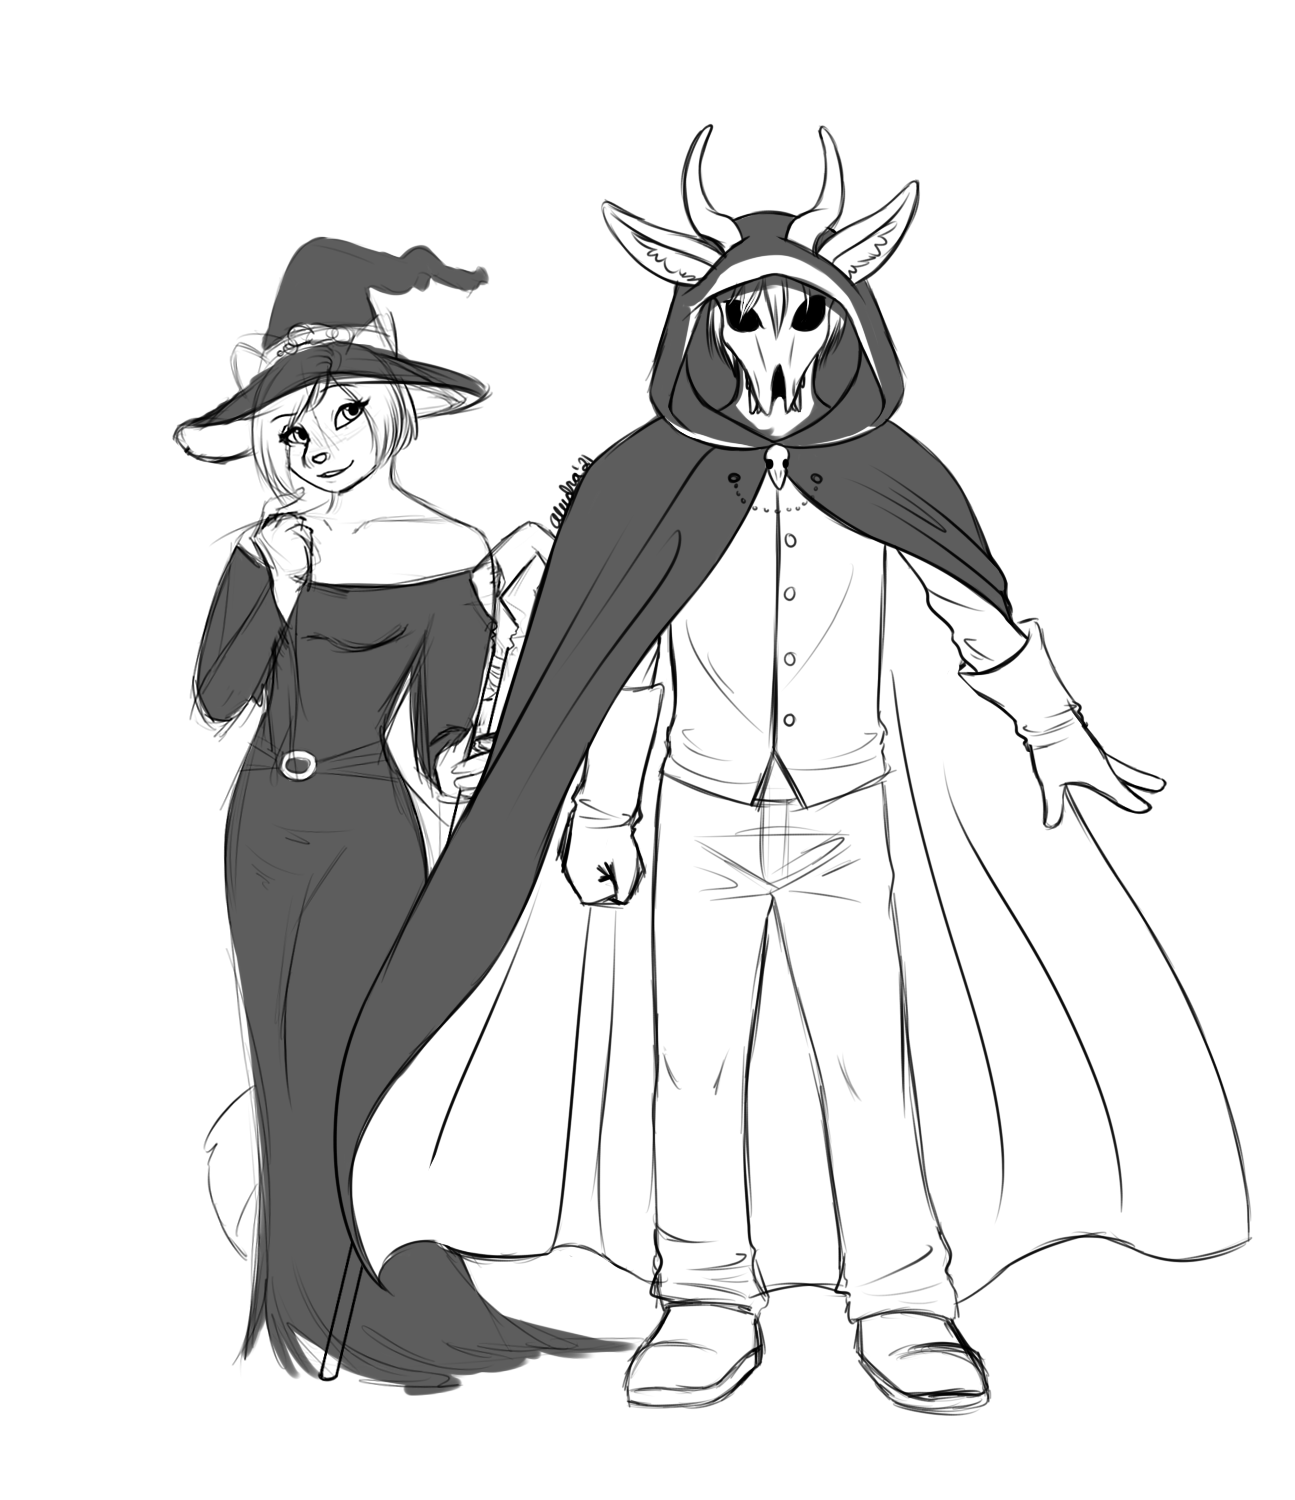 Part two of the Halloween sketch. Sigh ends up with a more traditional witch costume,<br>and Clintz gets to hide his personality behind a mask. Also, heck yeah big flowing costume capes.